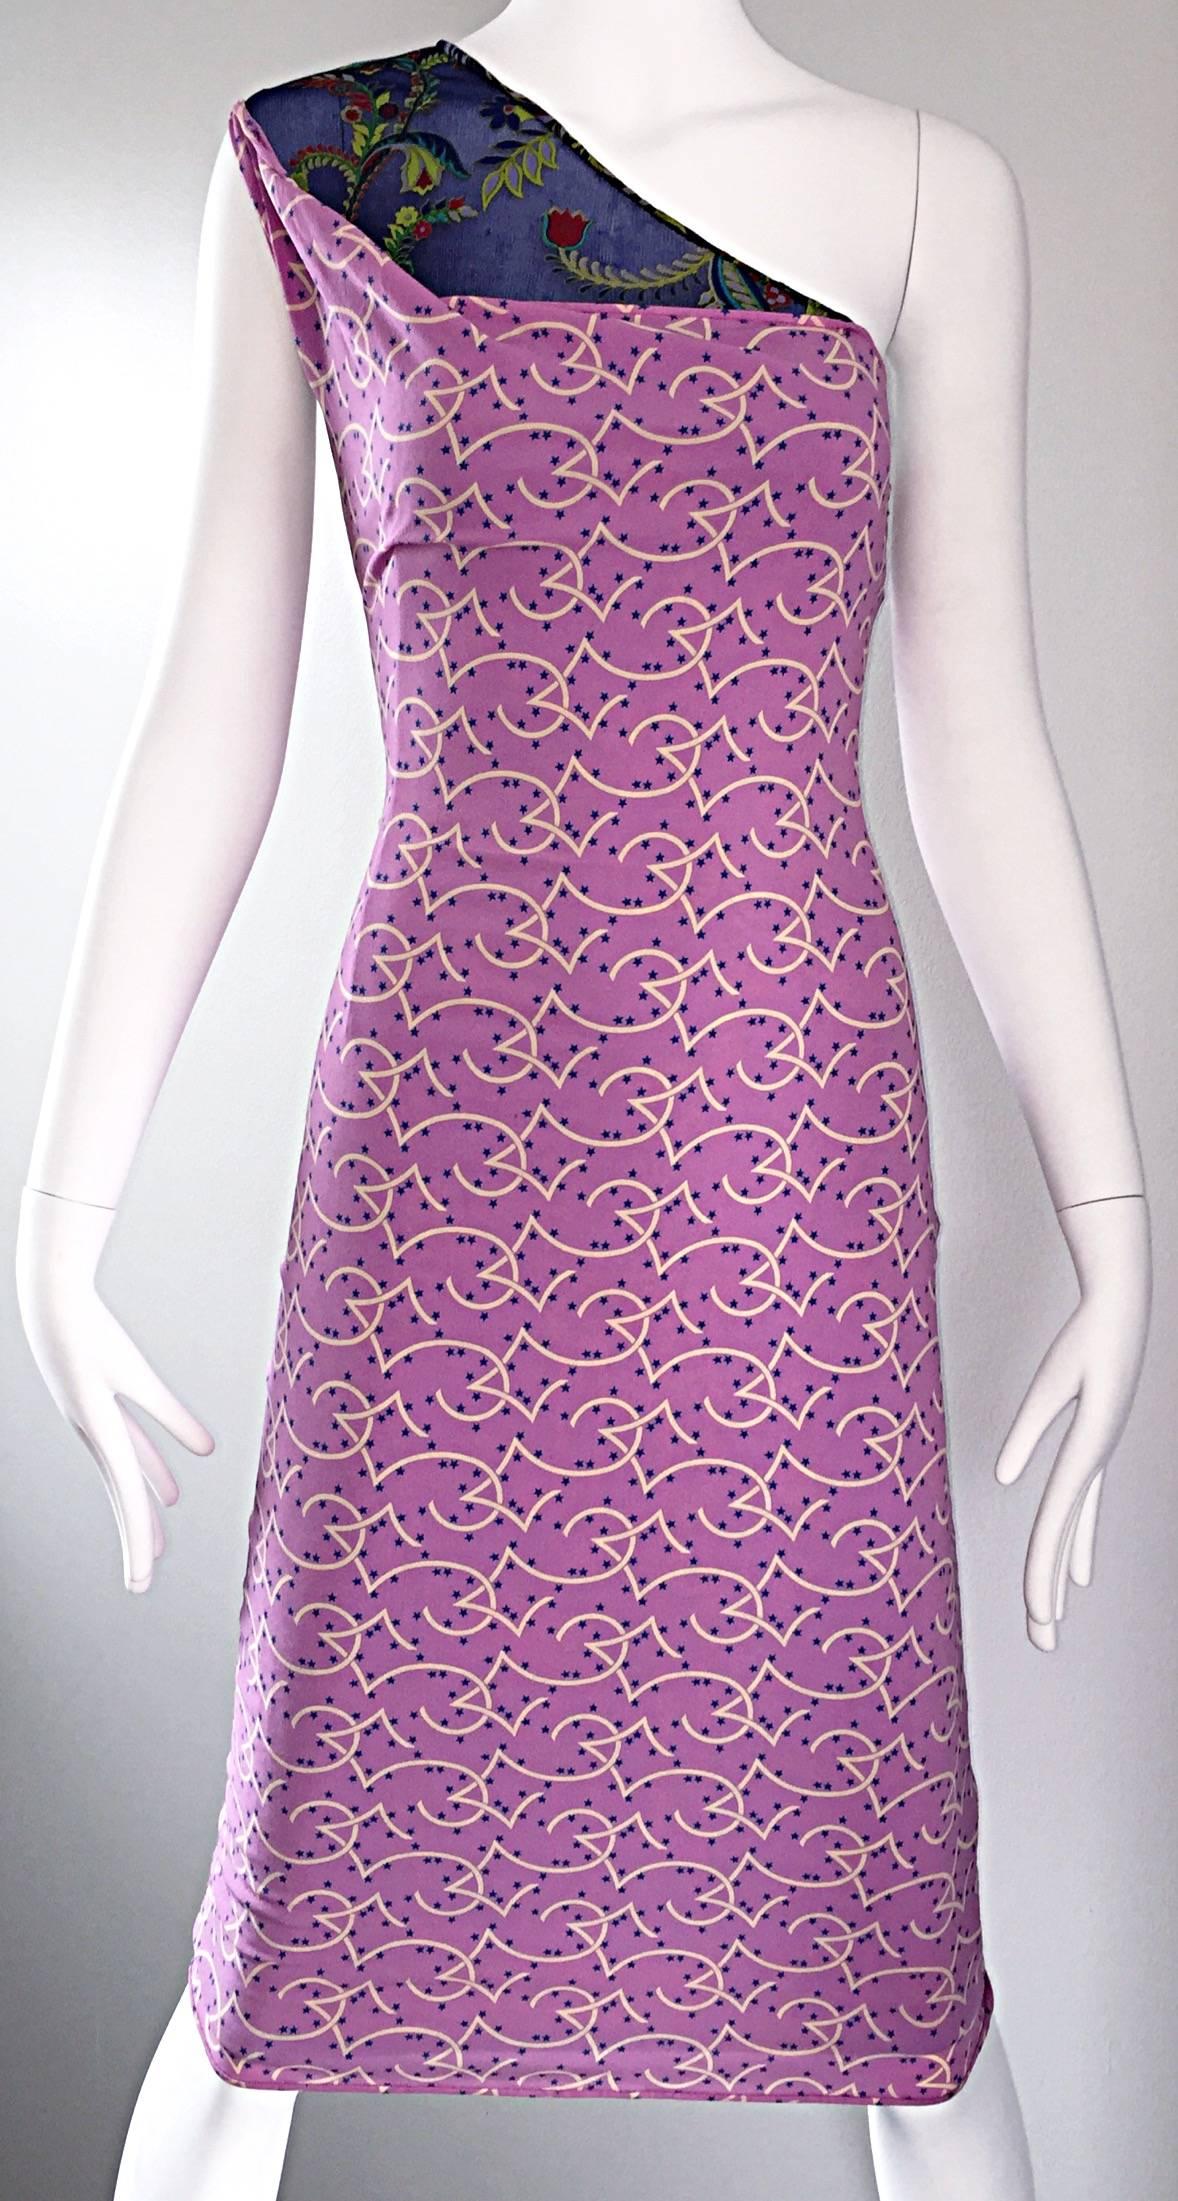 Amazing vintage 90s GIANNI VERSACE COUTURE (Pre Death) one shoulder bodcon dress! Features a purple silk/rayon jersey overlay, with mini stars printed throughout. Underneath is a vibrant royal blue tropical printed semi sheer silk attached toga